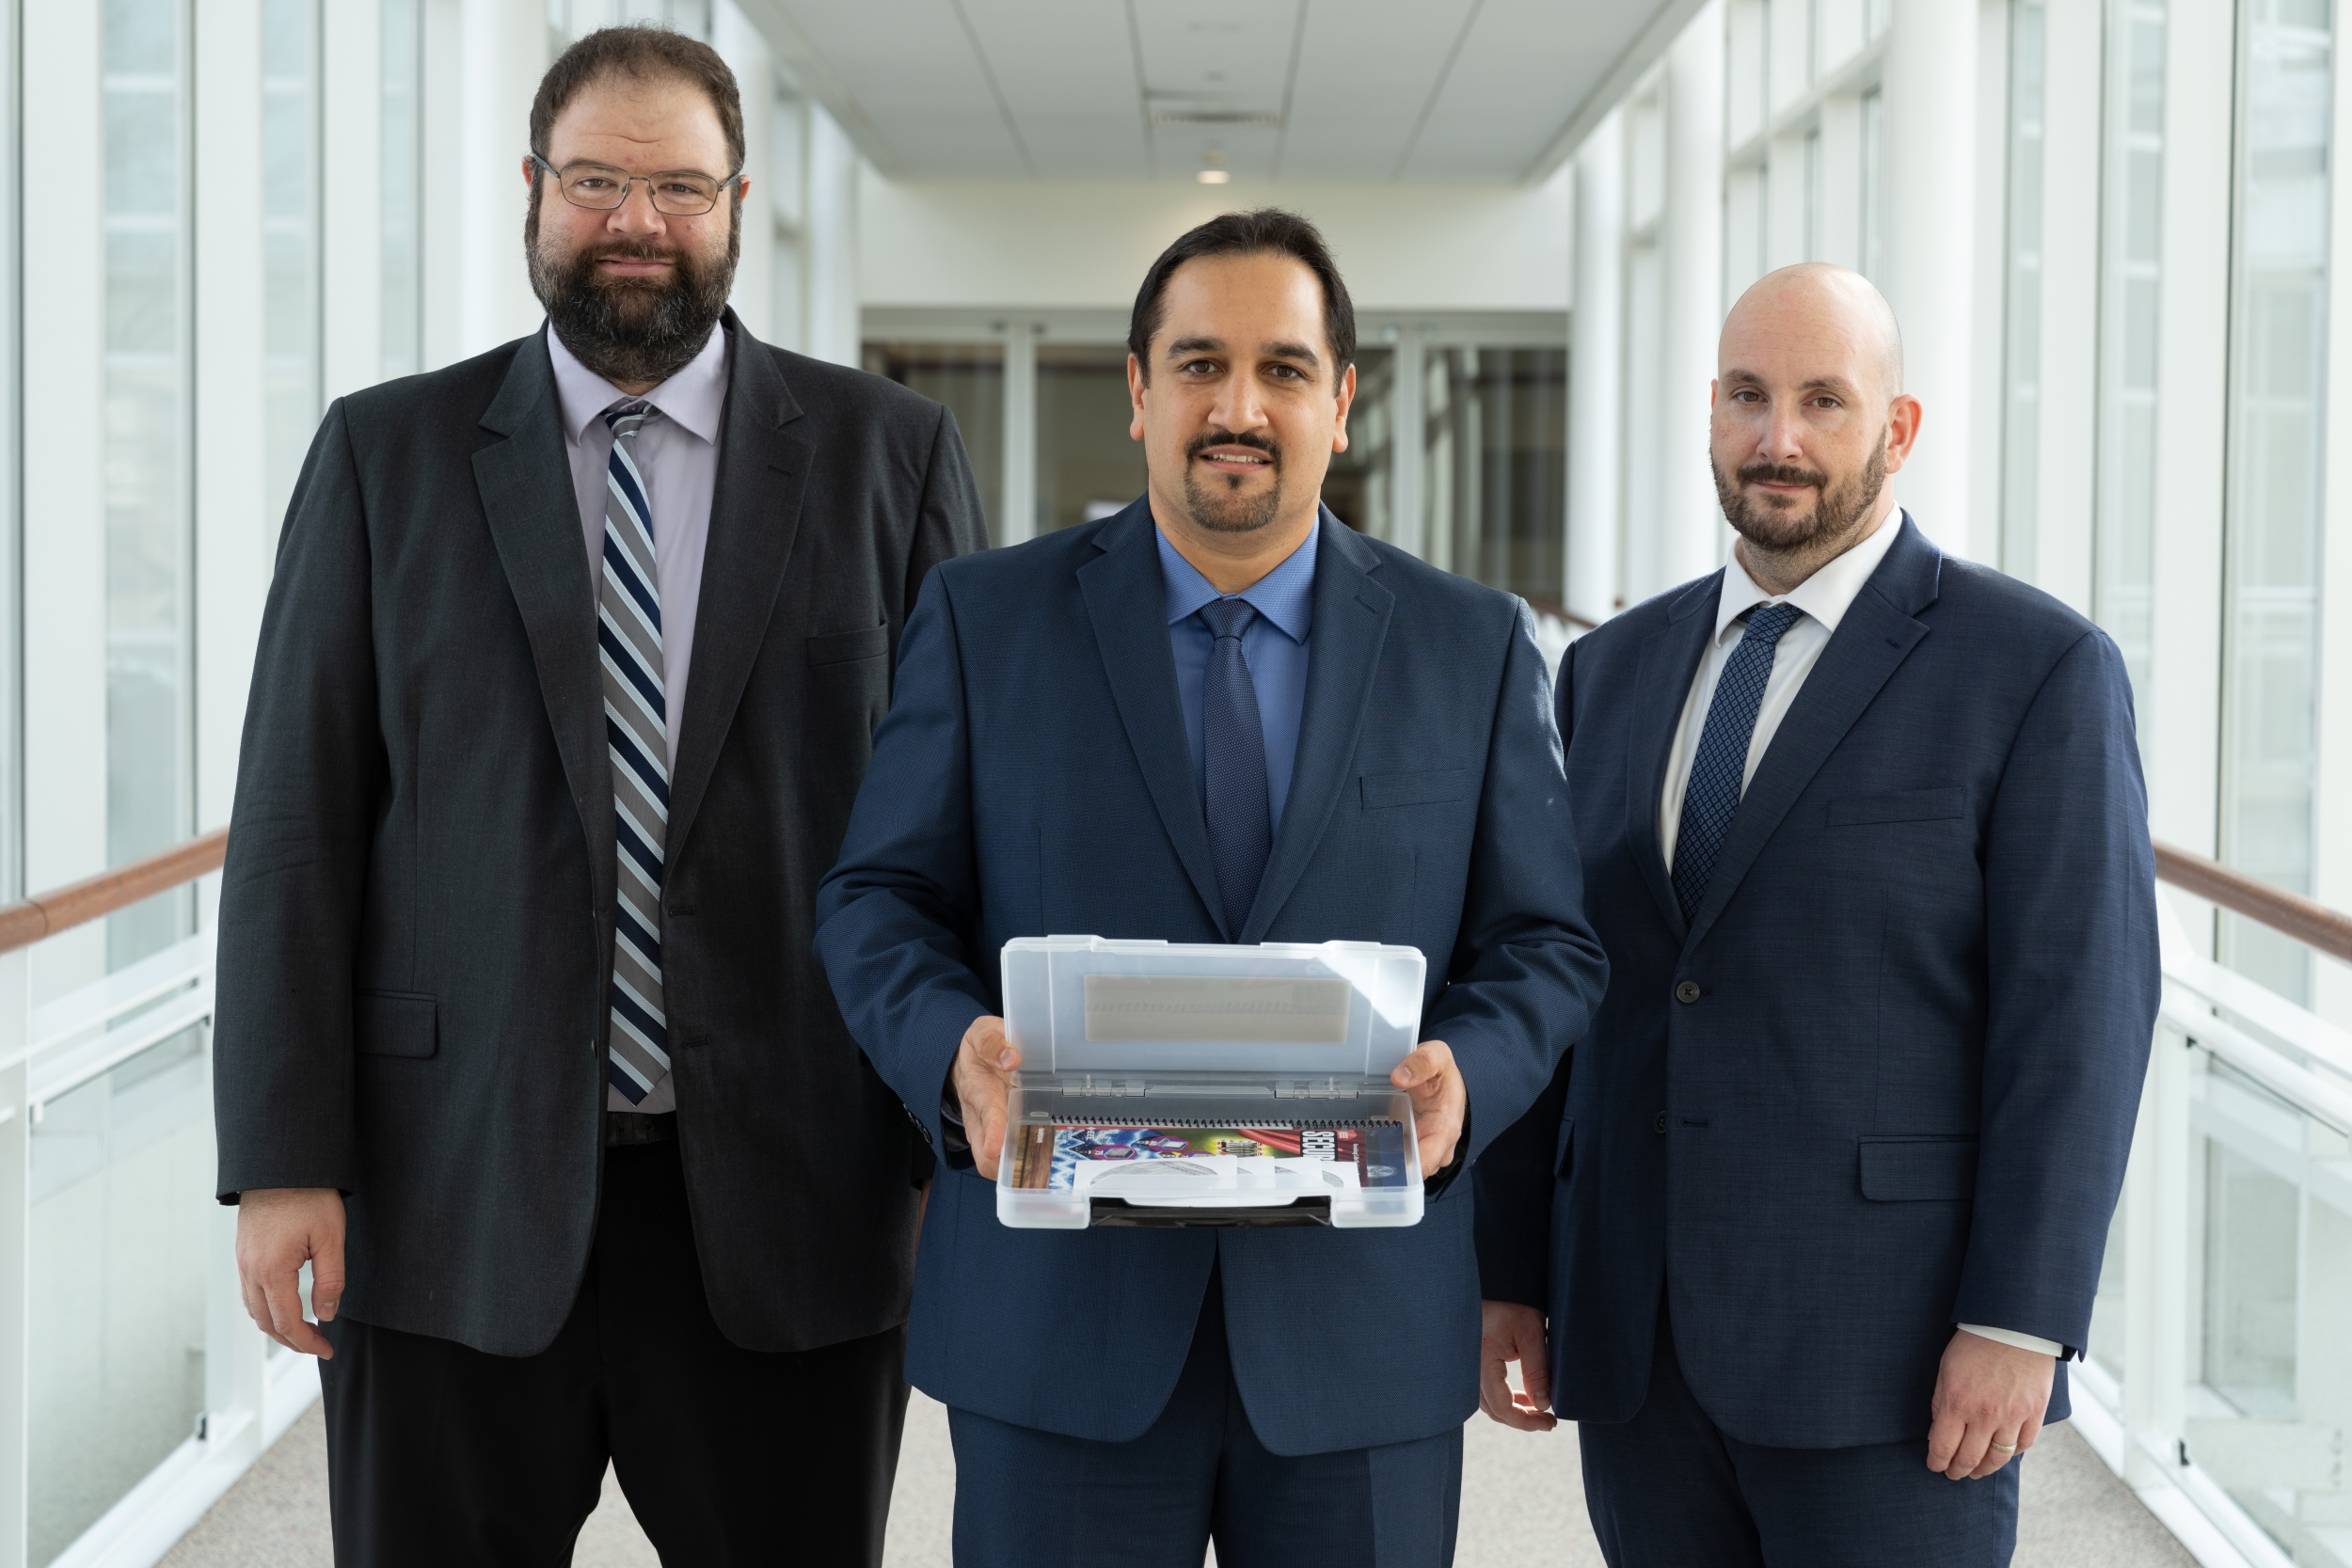 Three men stand side by side, with the person in the middle holding a box containing a software package.